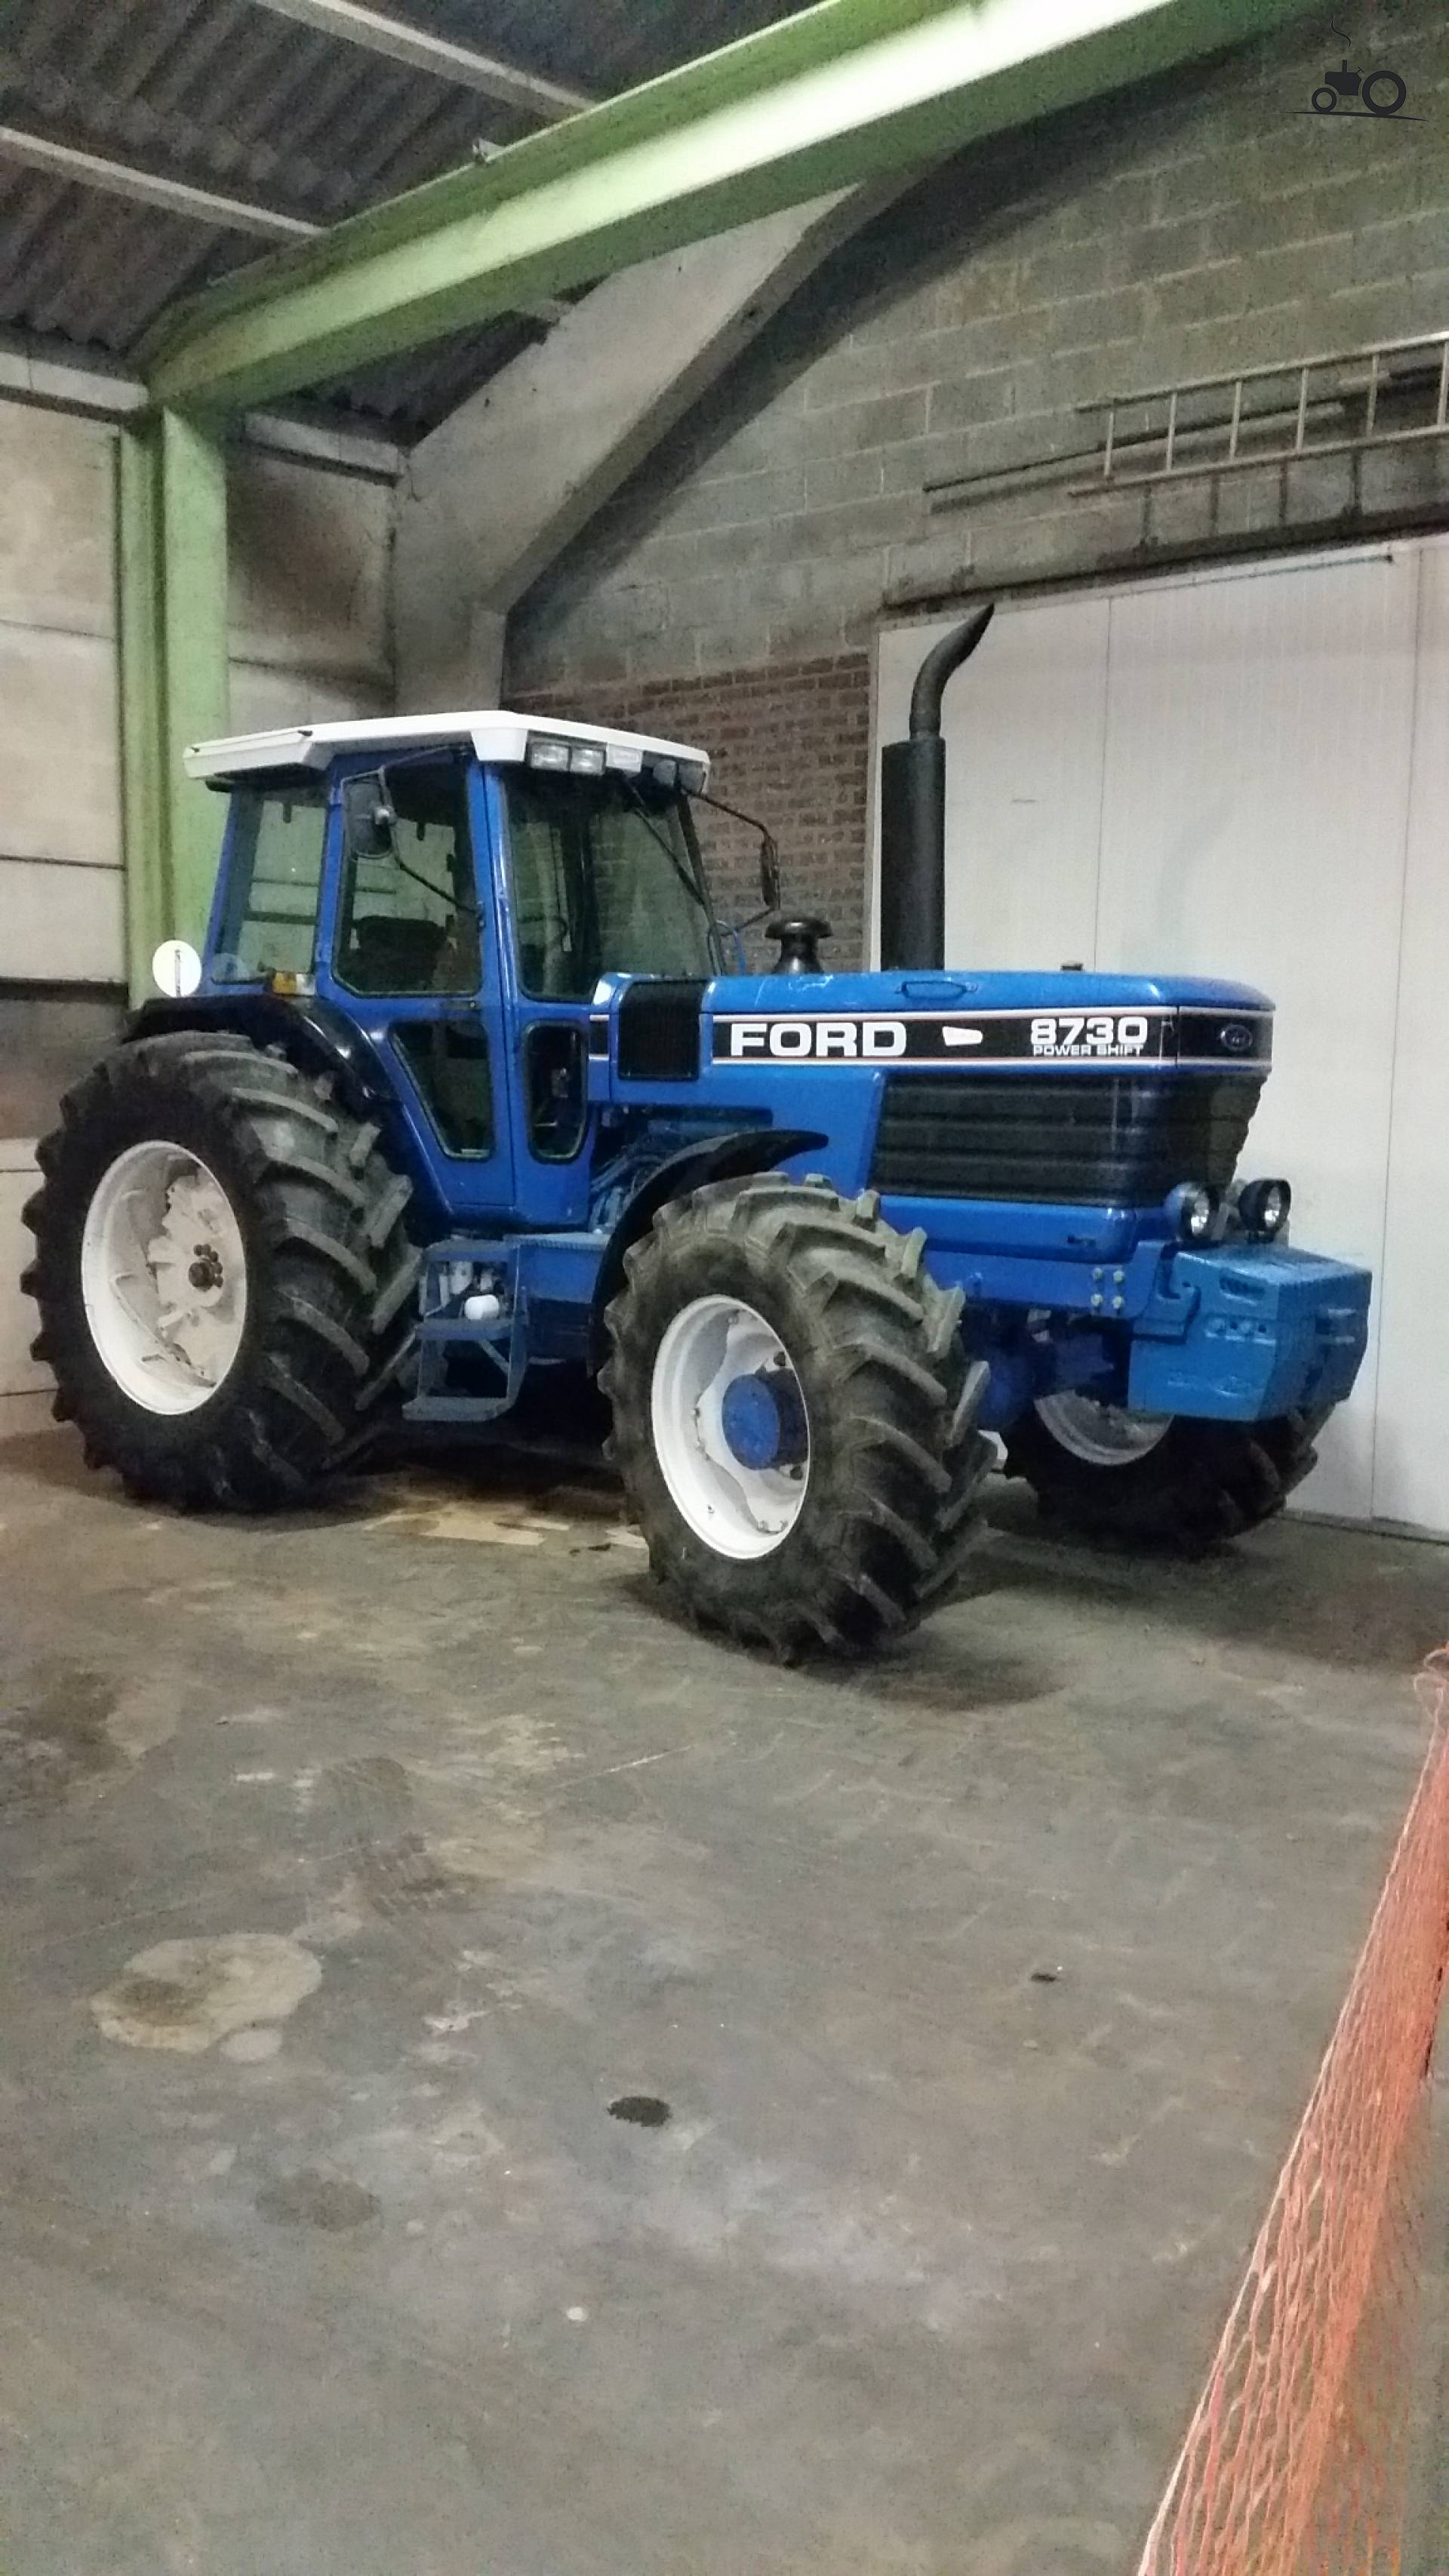 IMCDb.org: Ford New Holland 8730 in 